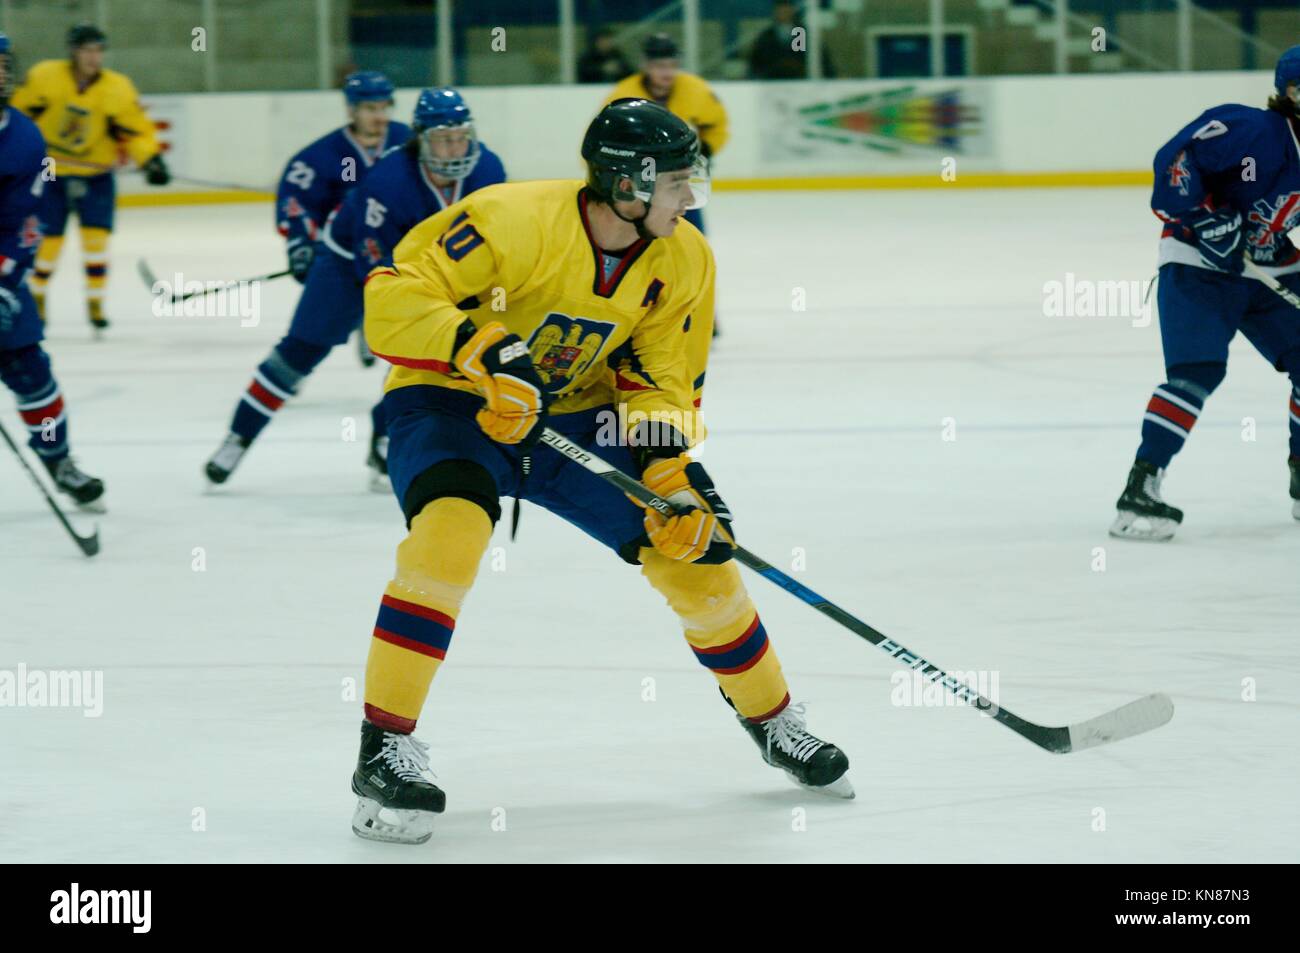 Dumfries, Scotland, 10 December 2017. Andrei Vasile, alternate captain, playing for Romania against Great Britain in the 2018 Ice Hockey U20 World Championship Division II, Group A match in Dumfries. Credit: Colin Edwards/Alamy Live News Stock Photo